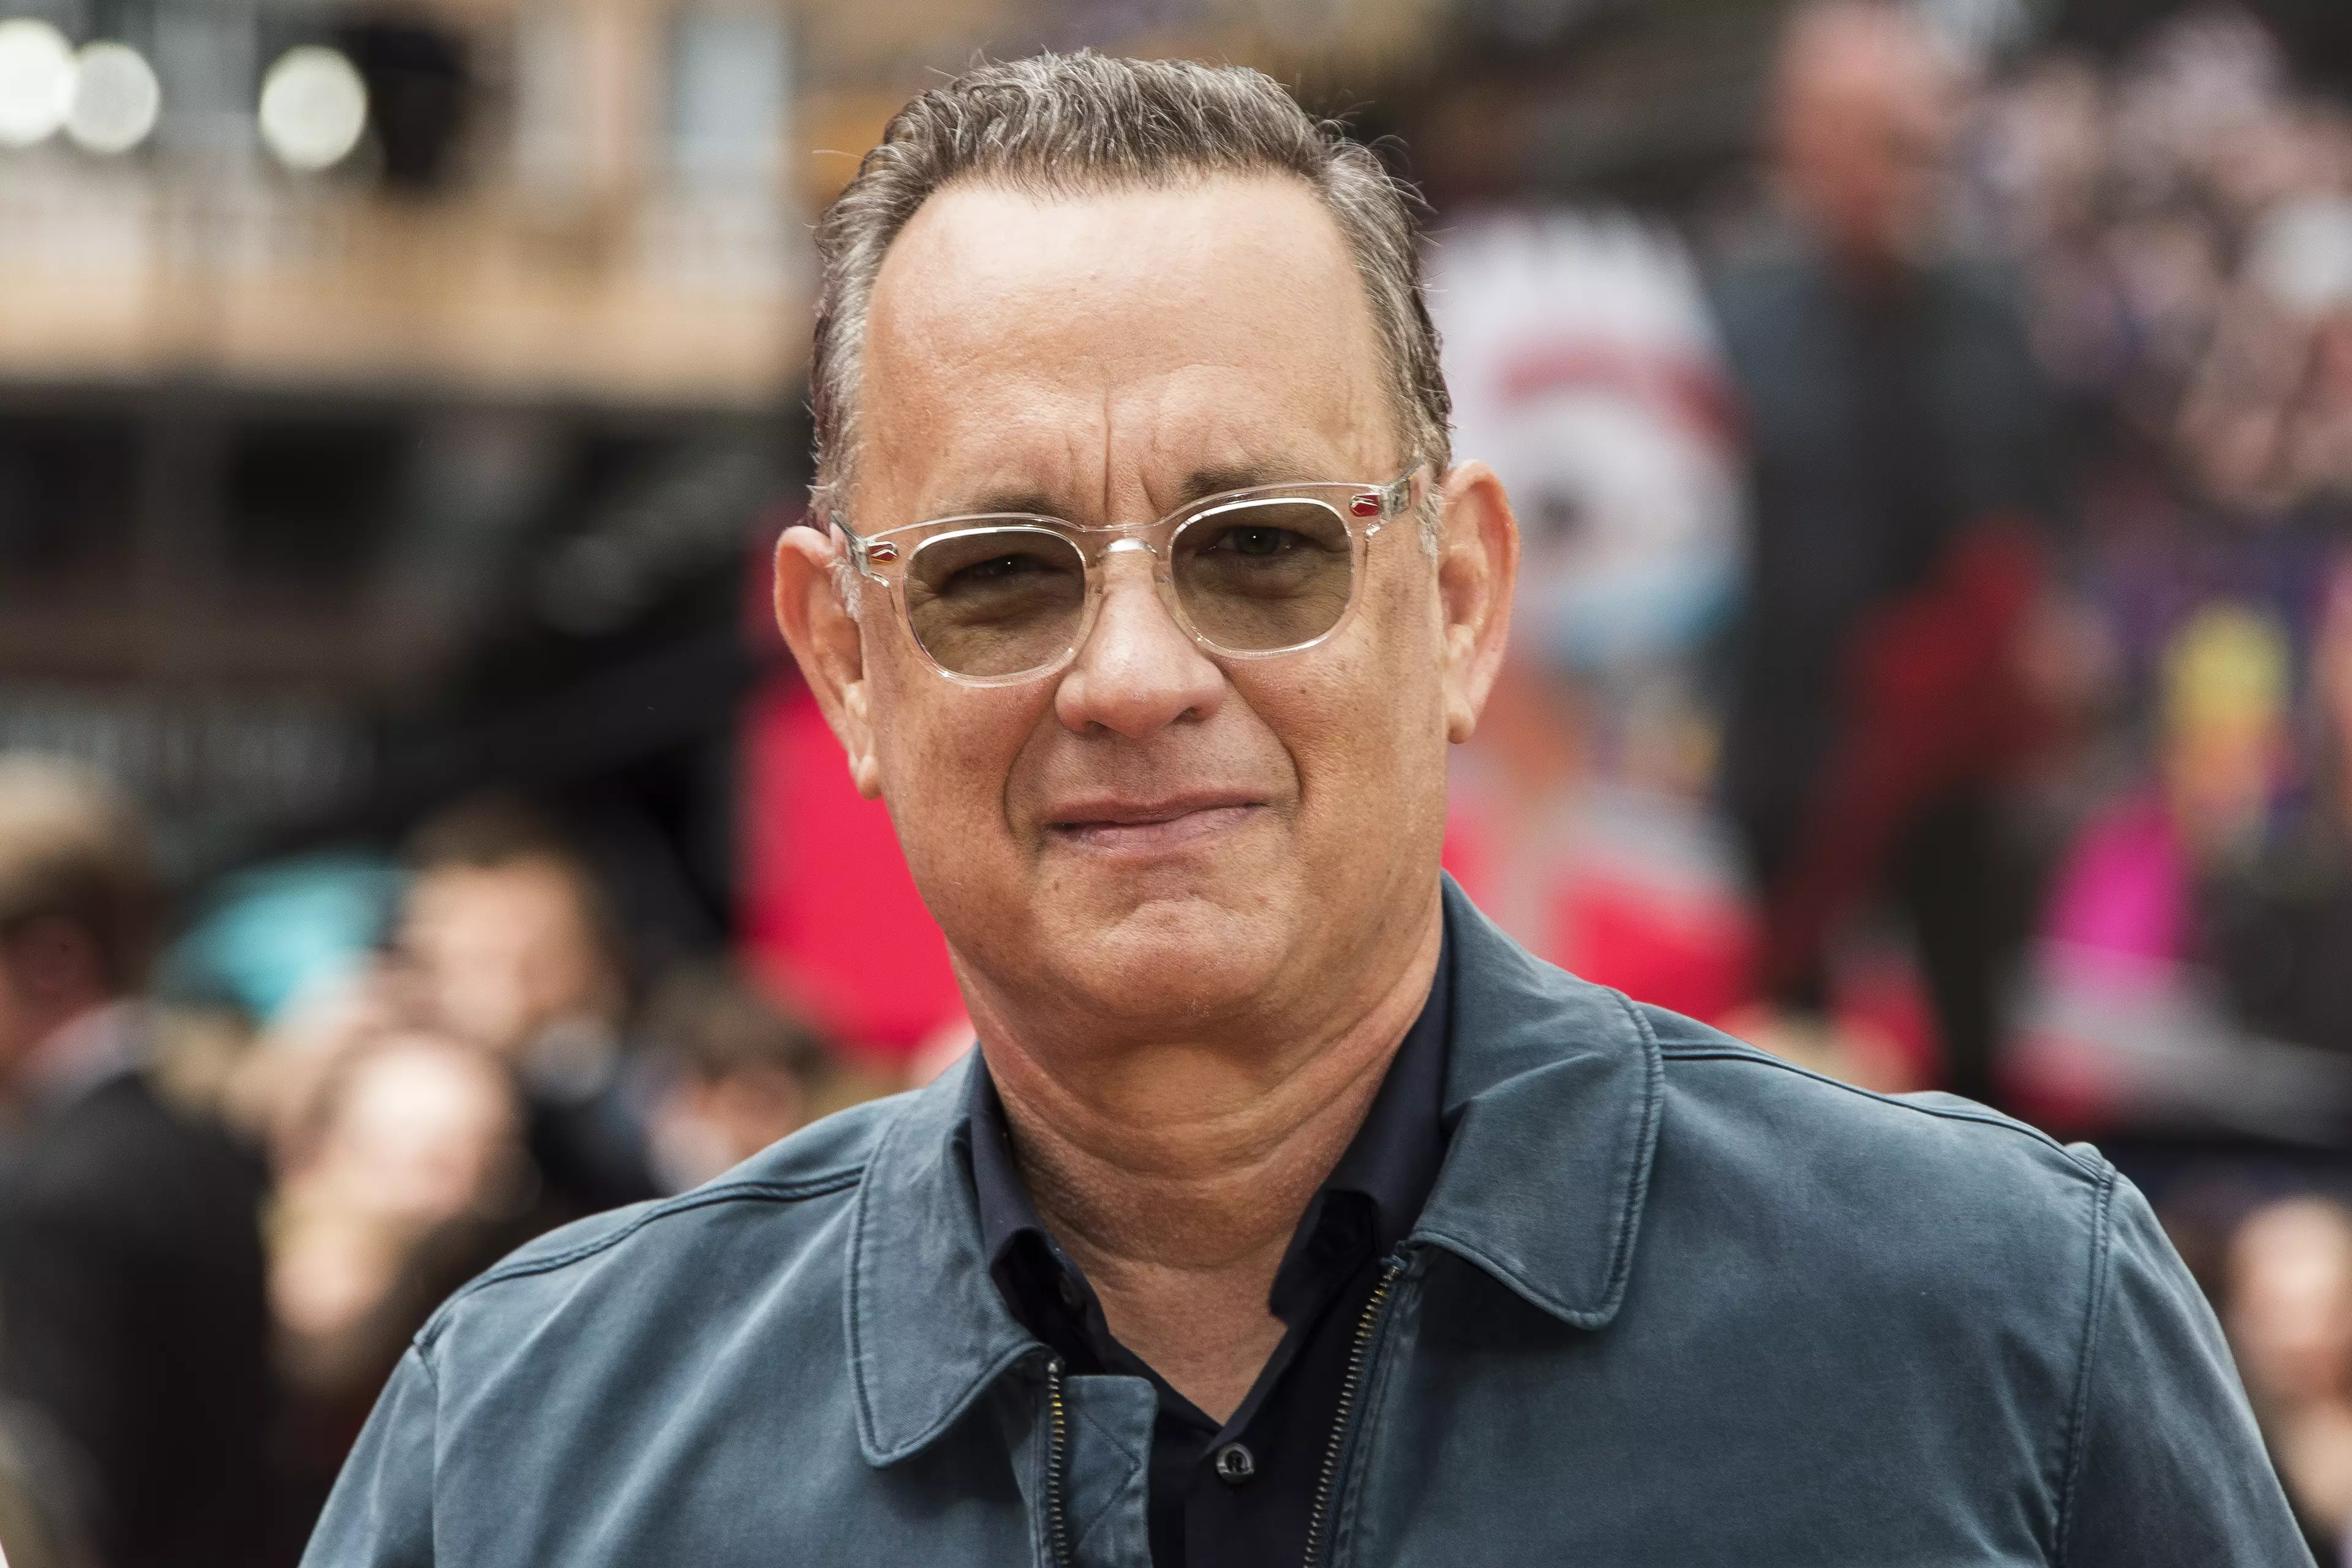 Tom Hanks said he never envisaged Toy Story getting past the first film.